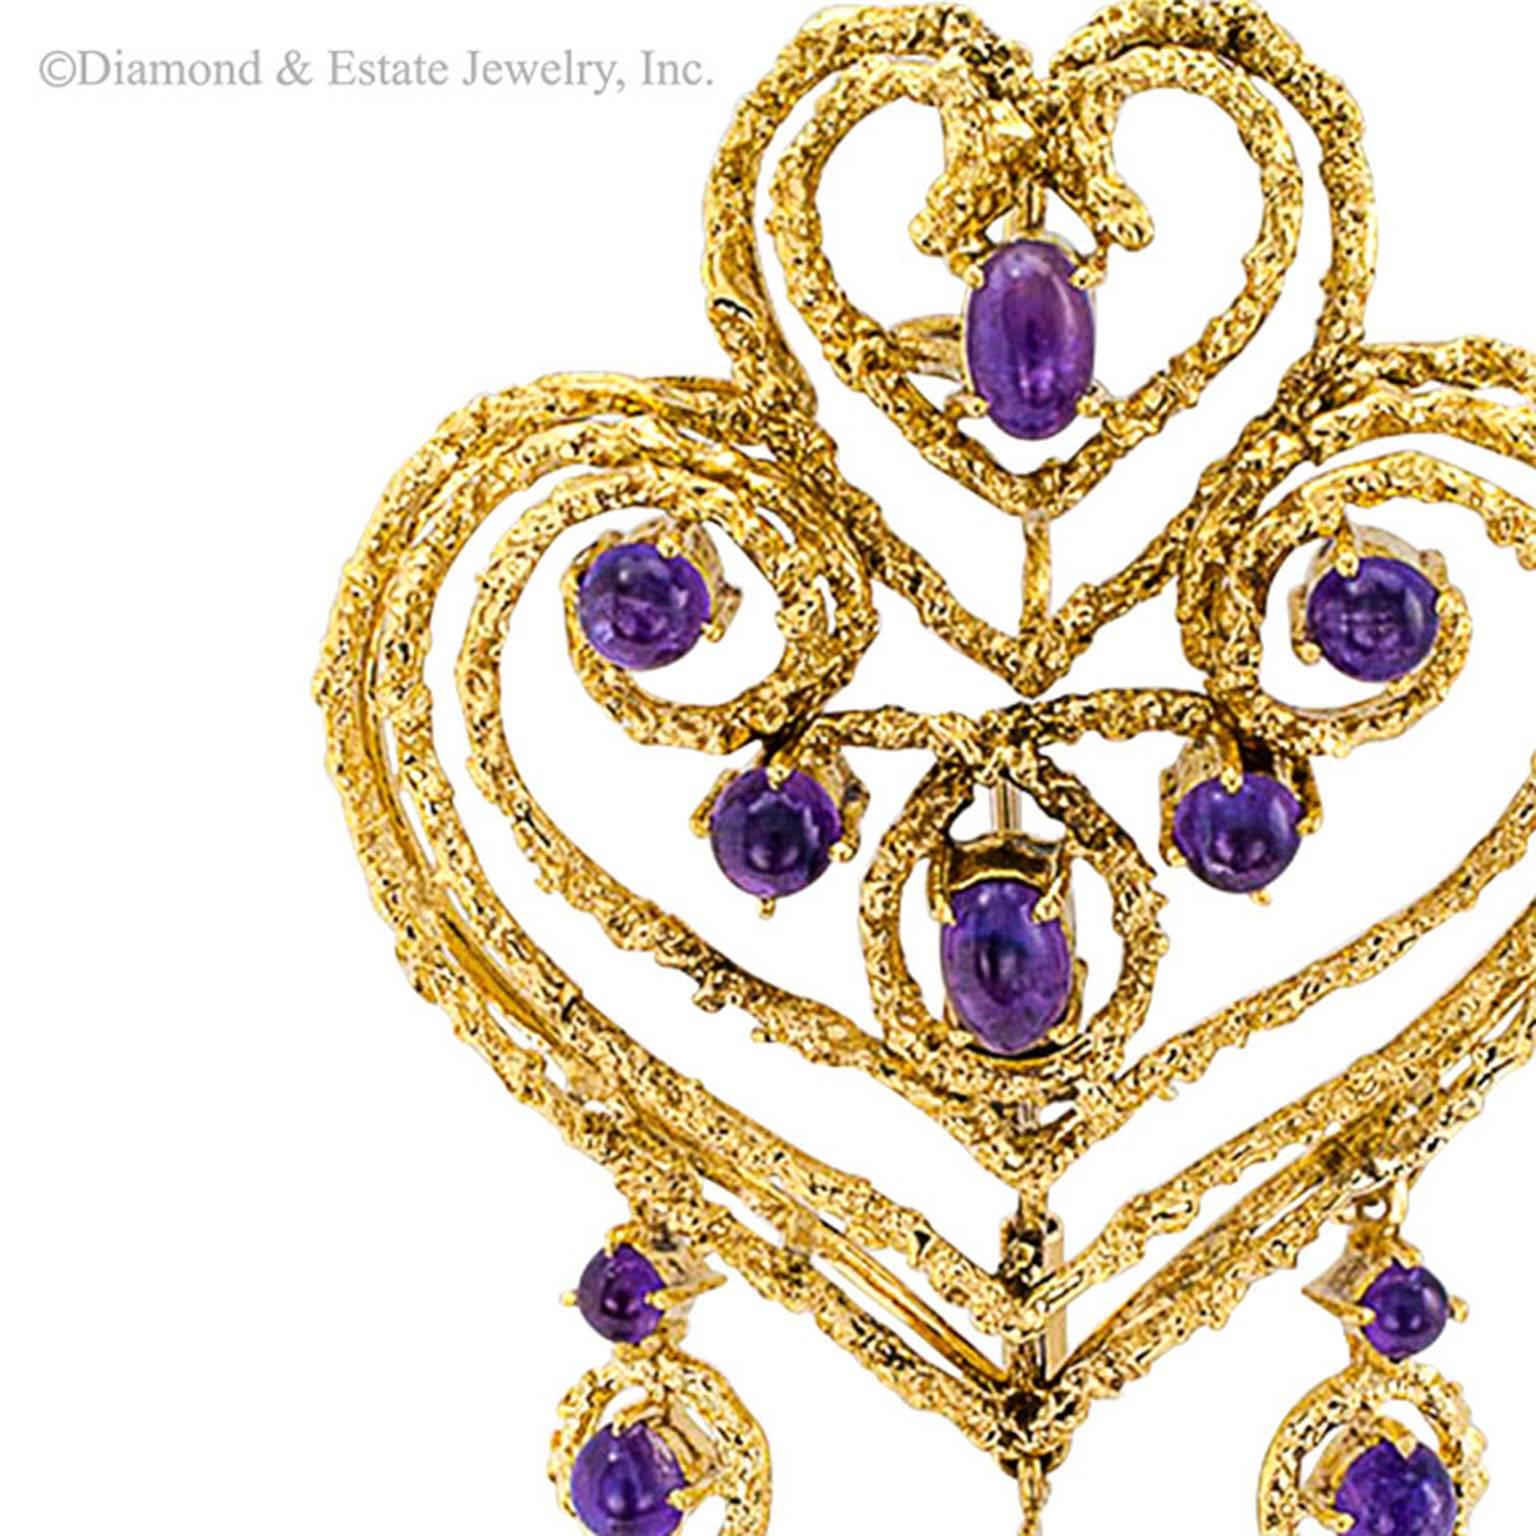 Spritzer & Furman Amethyst and Gold Heart-Shaped Brooch/Pendant

A Spritzer & Furman 18-karat textured gold larger scale design, a contemporary abstraction of five graduating and superimposed open work heart-shaped motifs adorned with cabochon